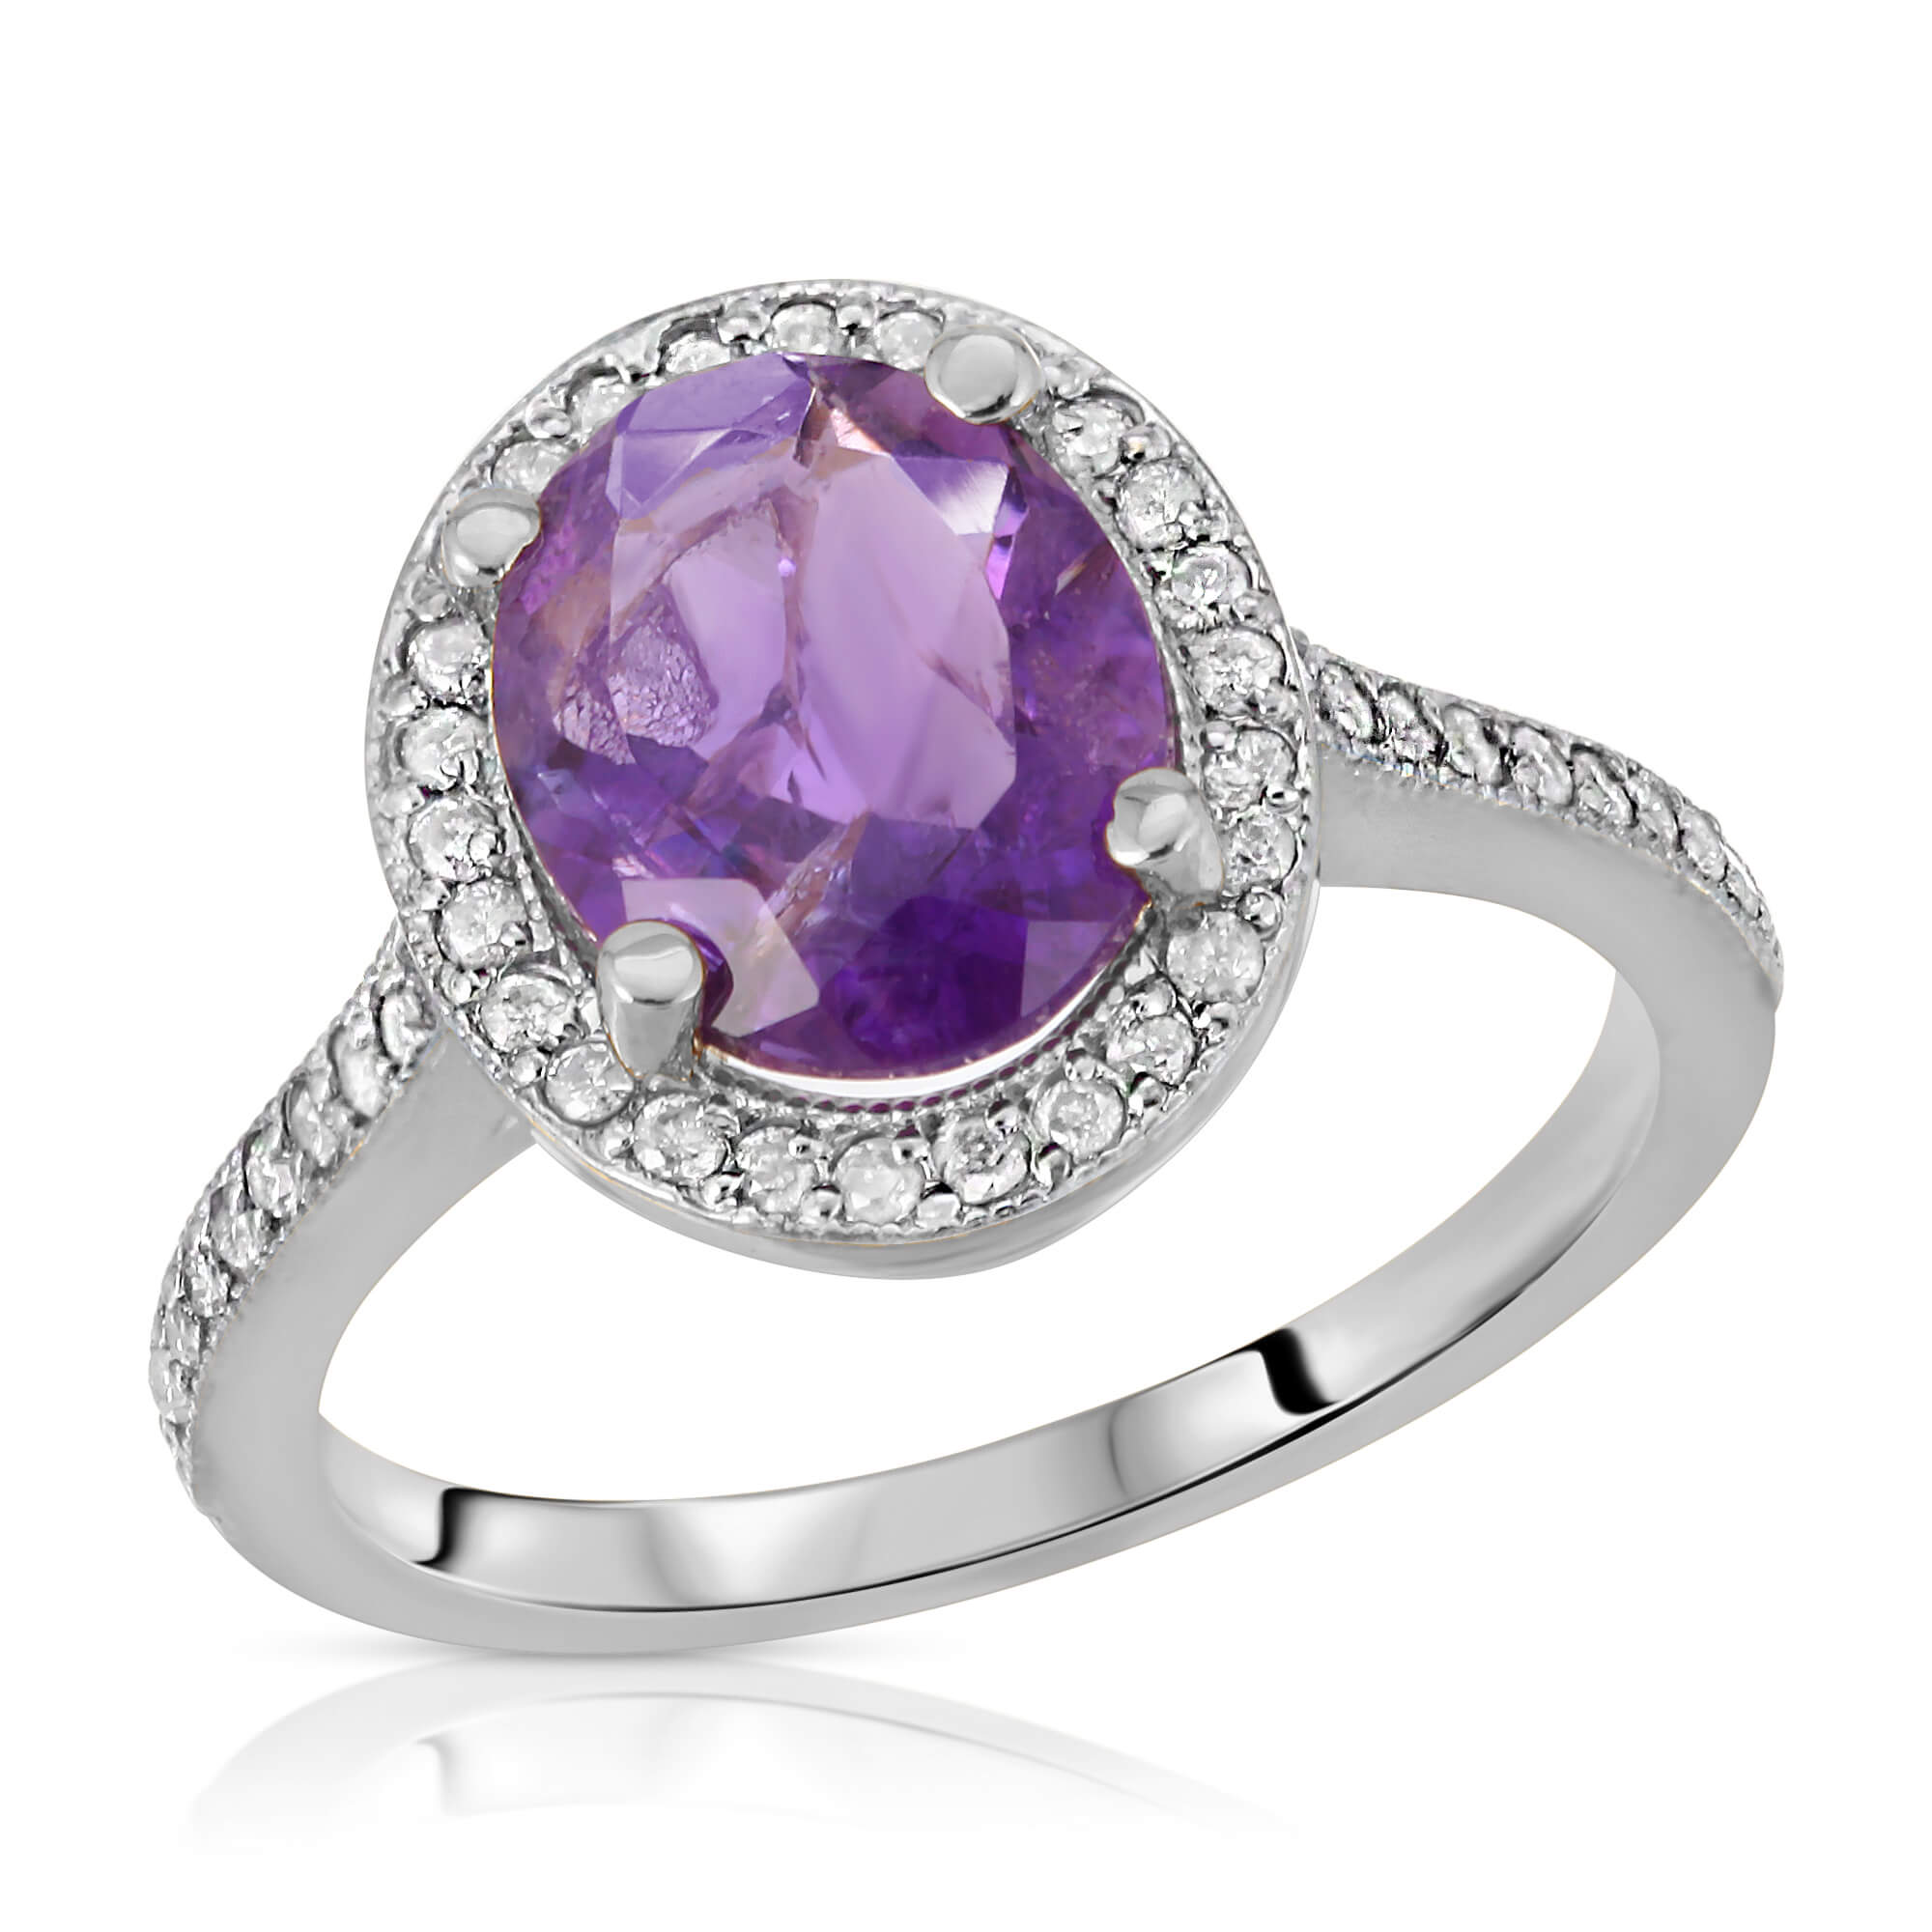 Oval Cut Amethyst Ring 2.55 ctw in Sterling Silver